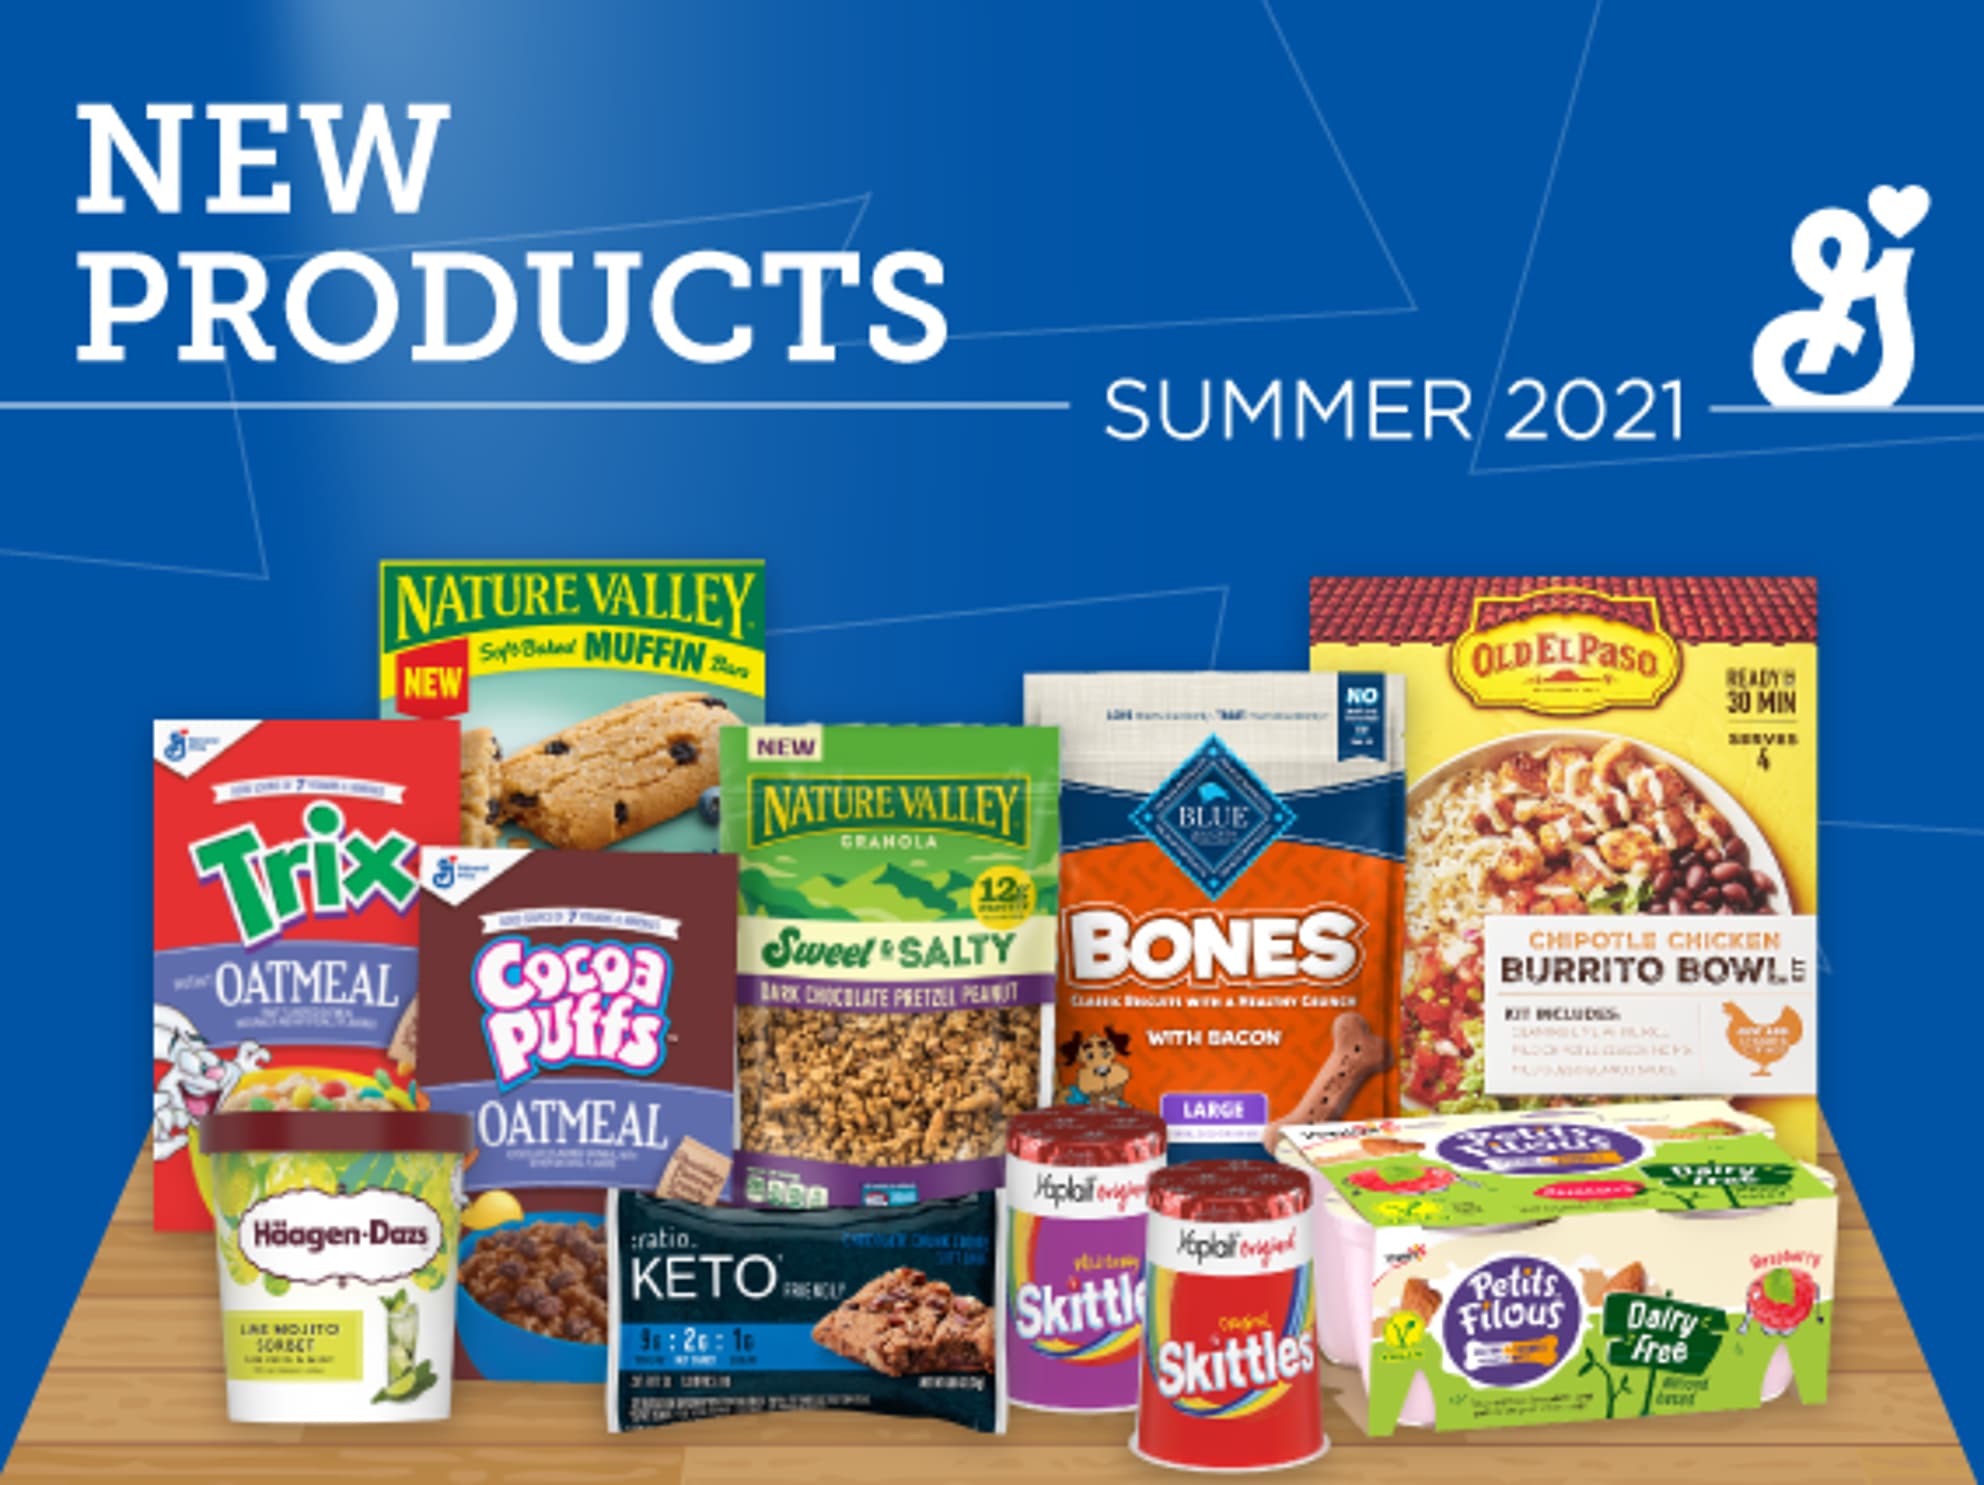 New products for summer 2021 - General Mills